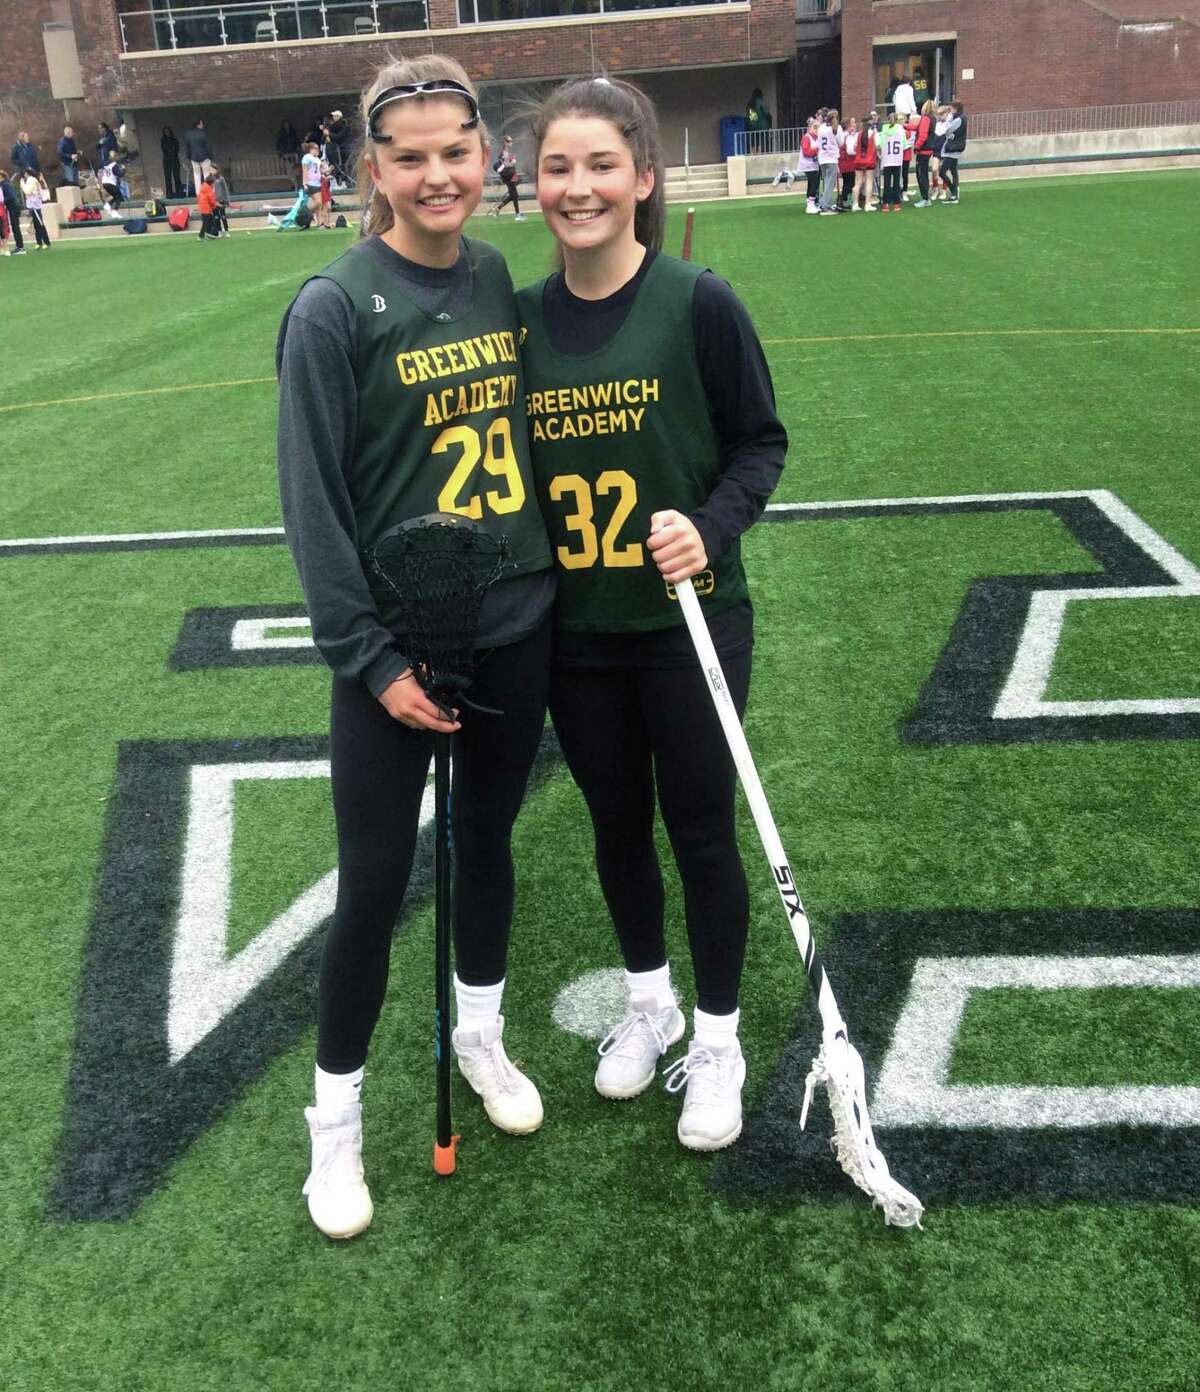 Leila Schneider and Taylor Lane will serve as captains on the Greenwich Academy lacrosse team, which went 15-1 last season.